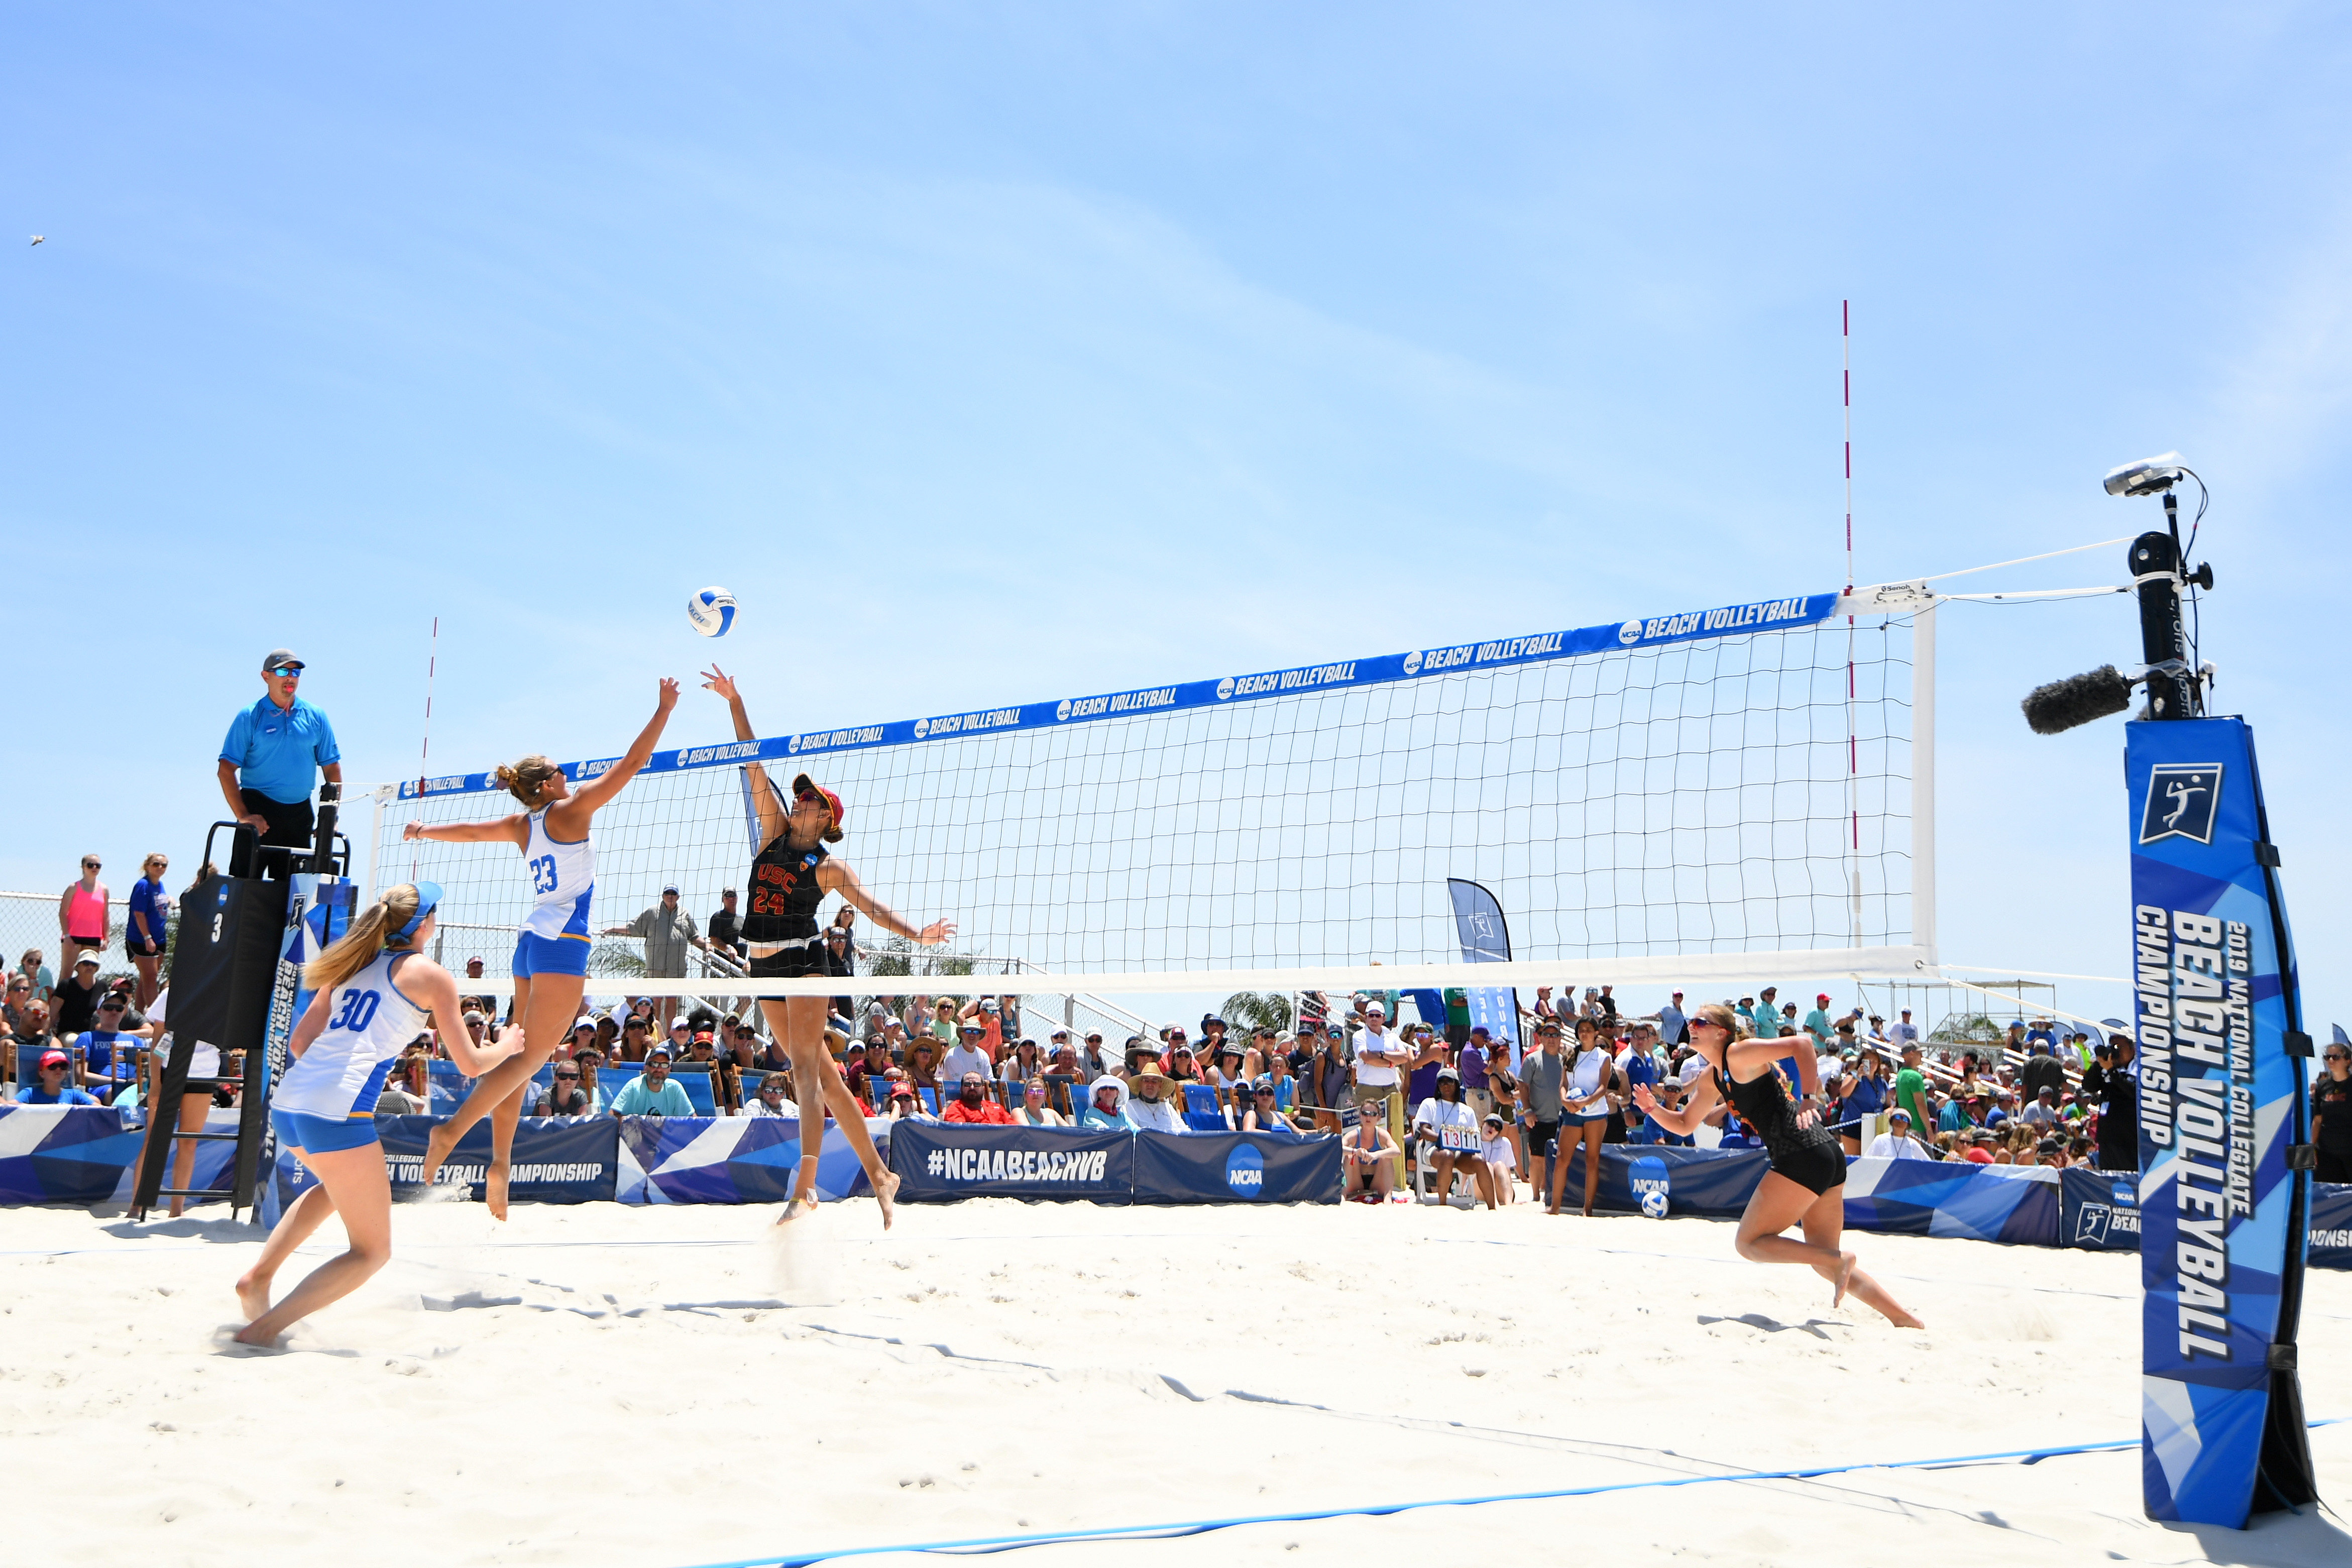 challenge cup volleyball live stream